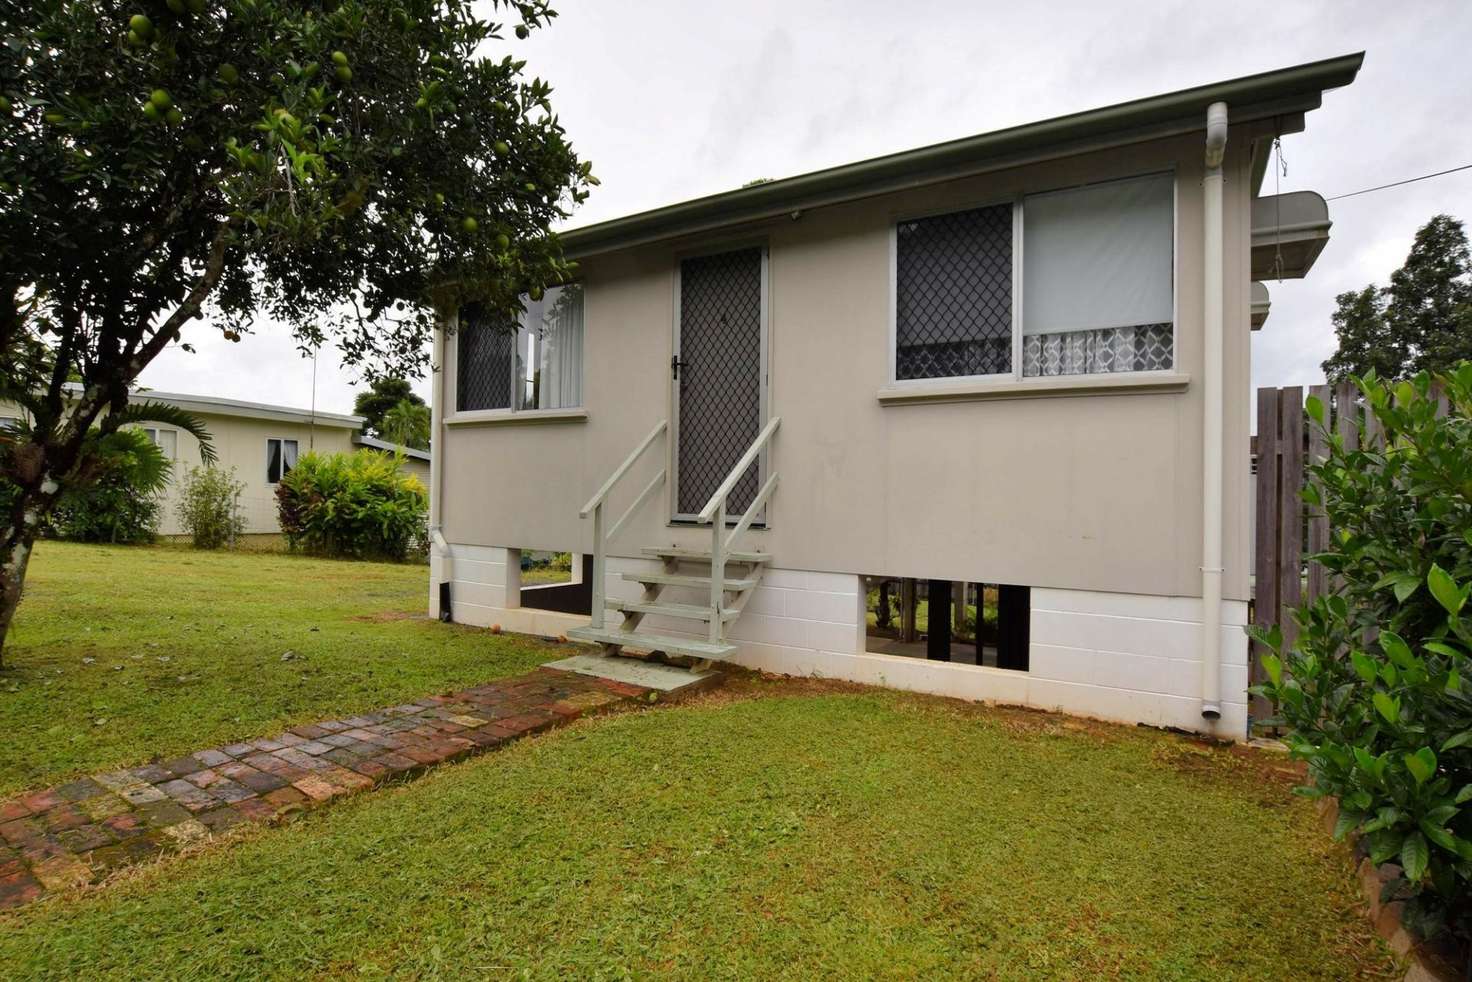 Main view of Homely house listing, 4 Brannigan Street, Tully QLD 4854